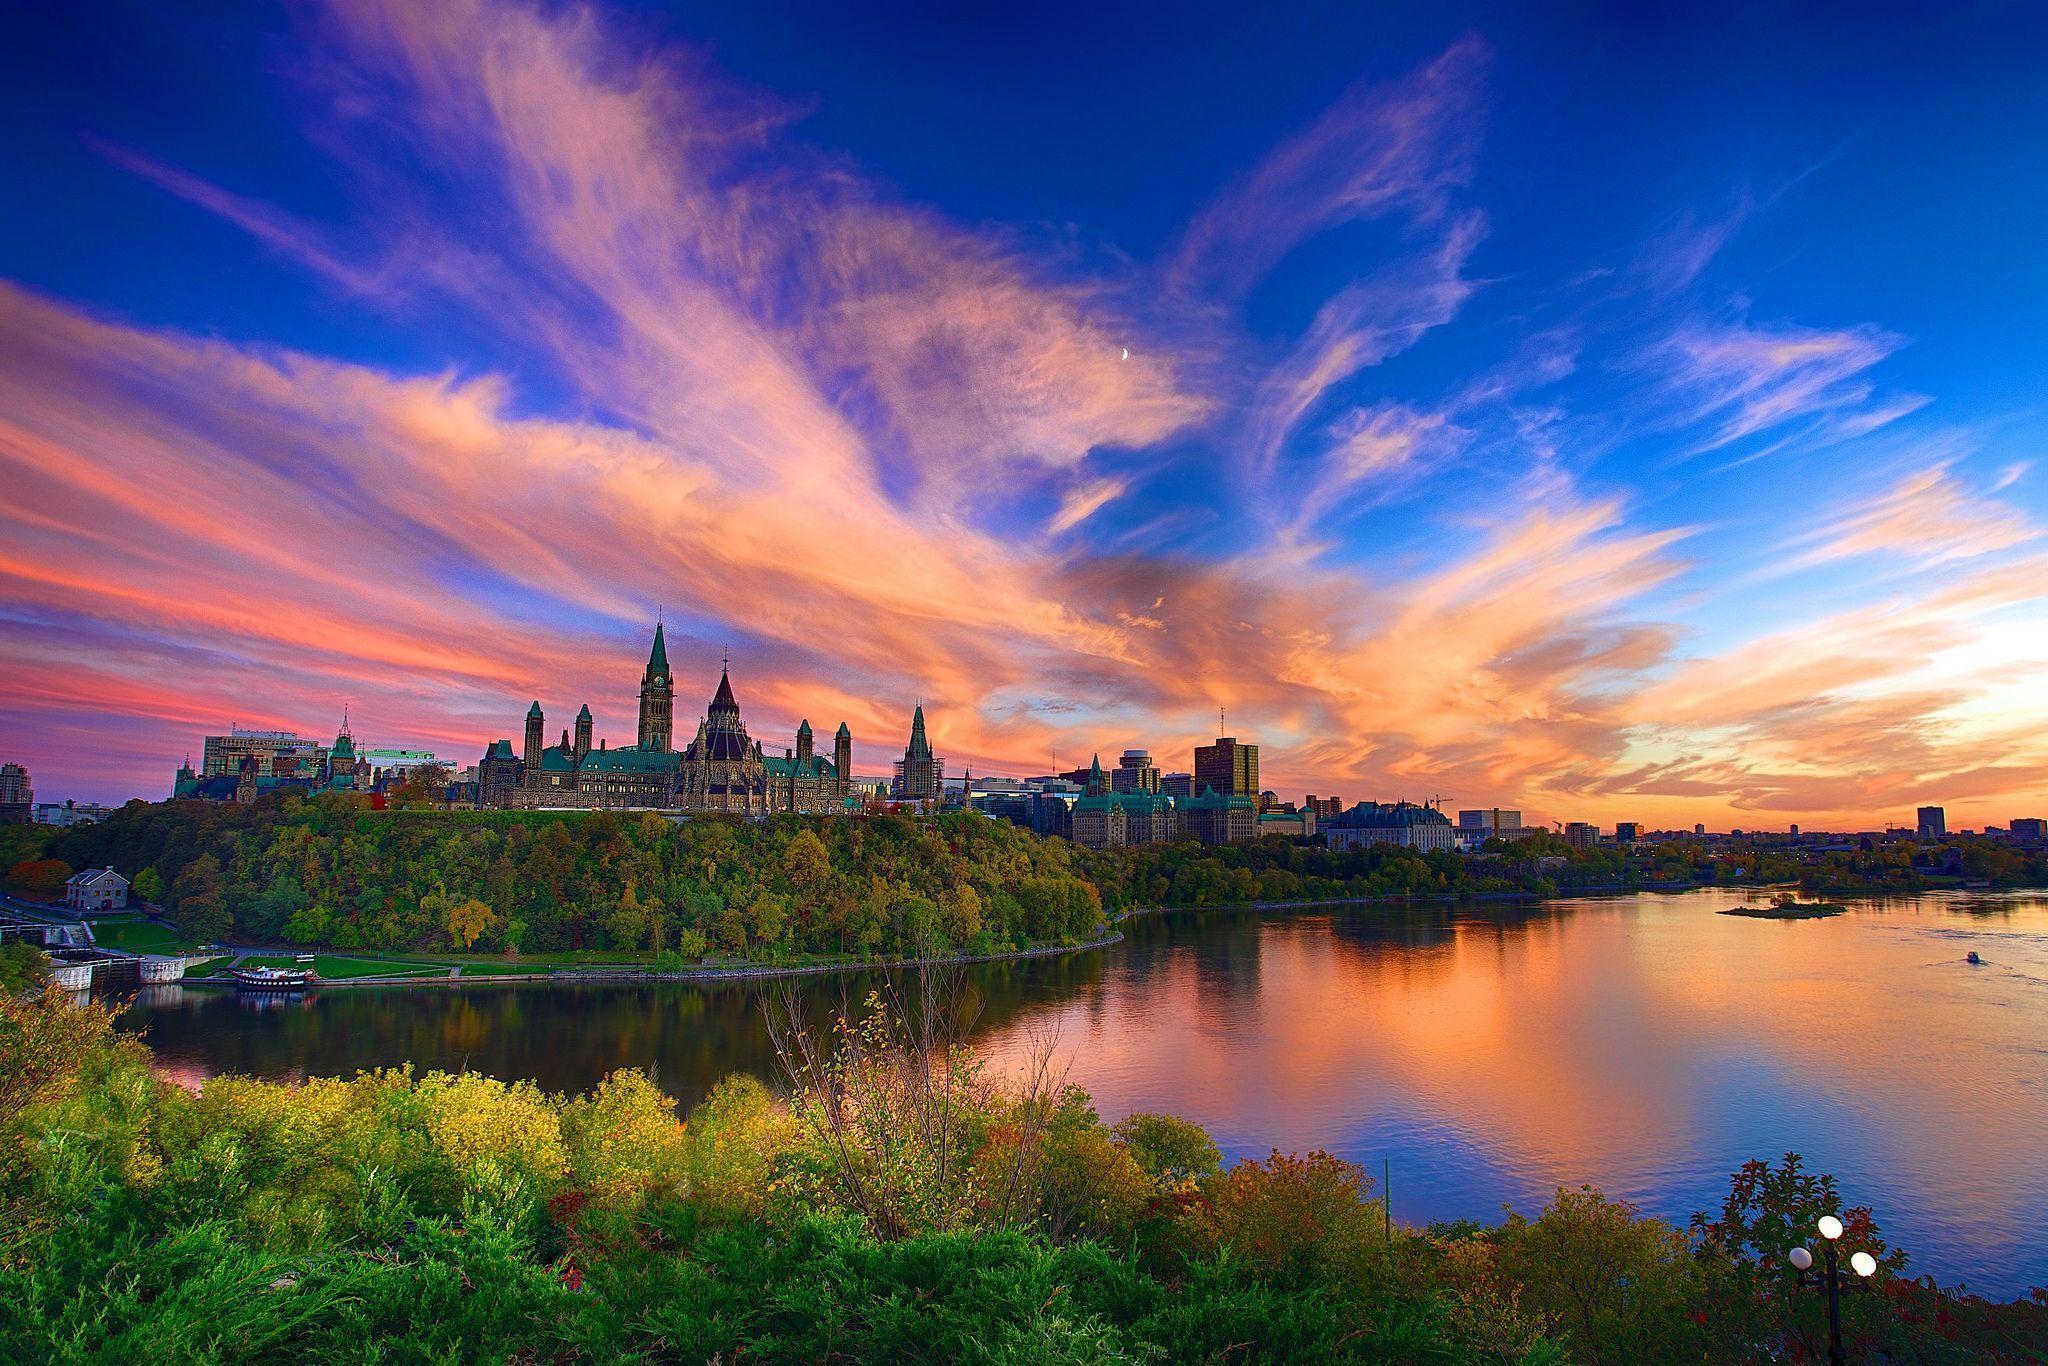 Sunset over Parliament Hill in Canada Computer Wallpapers, Desktop